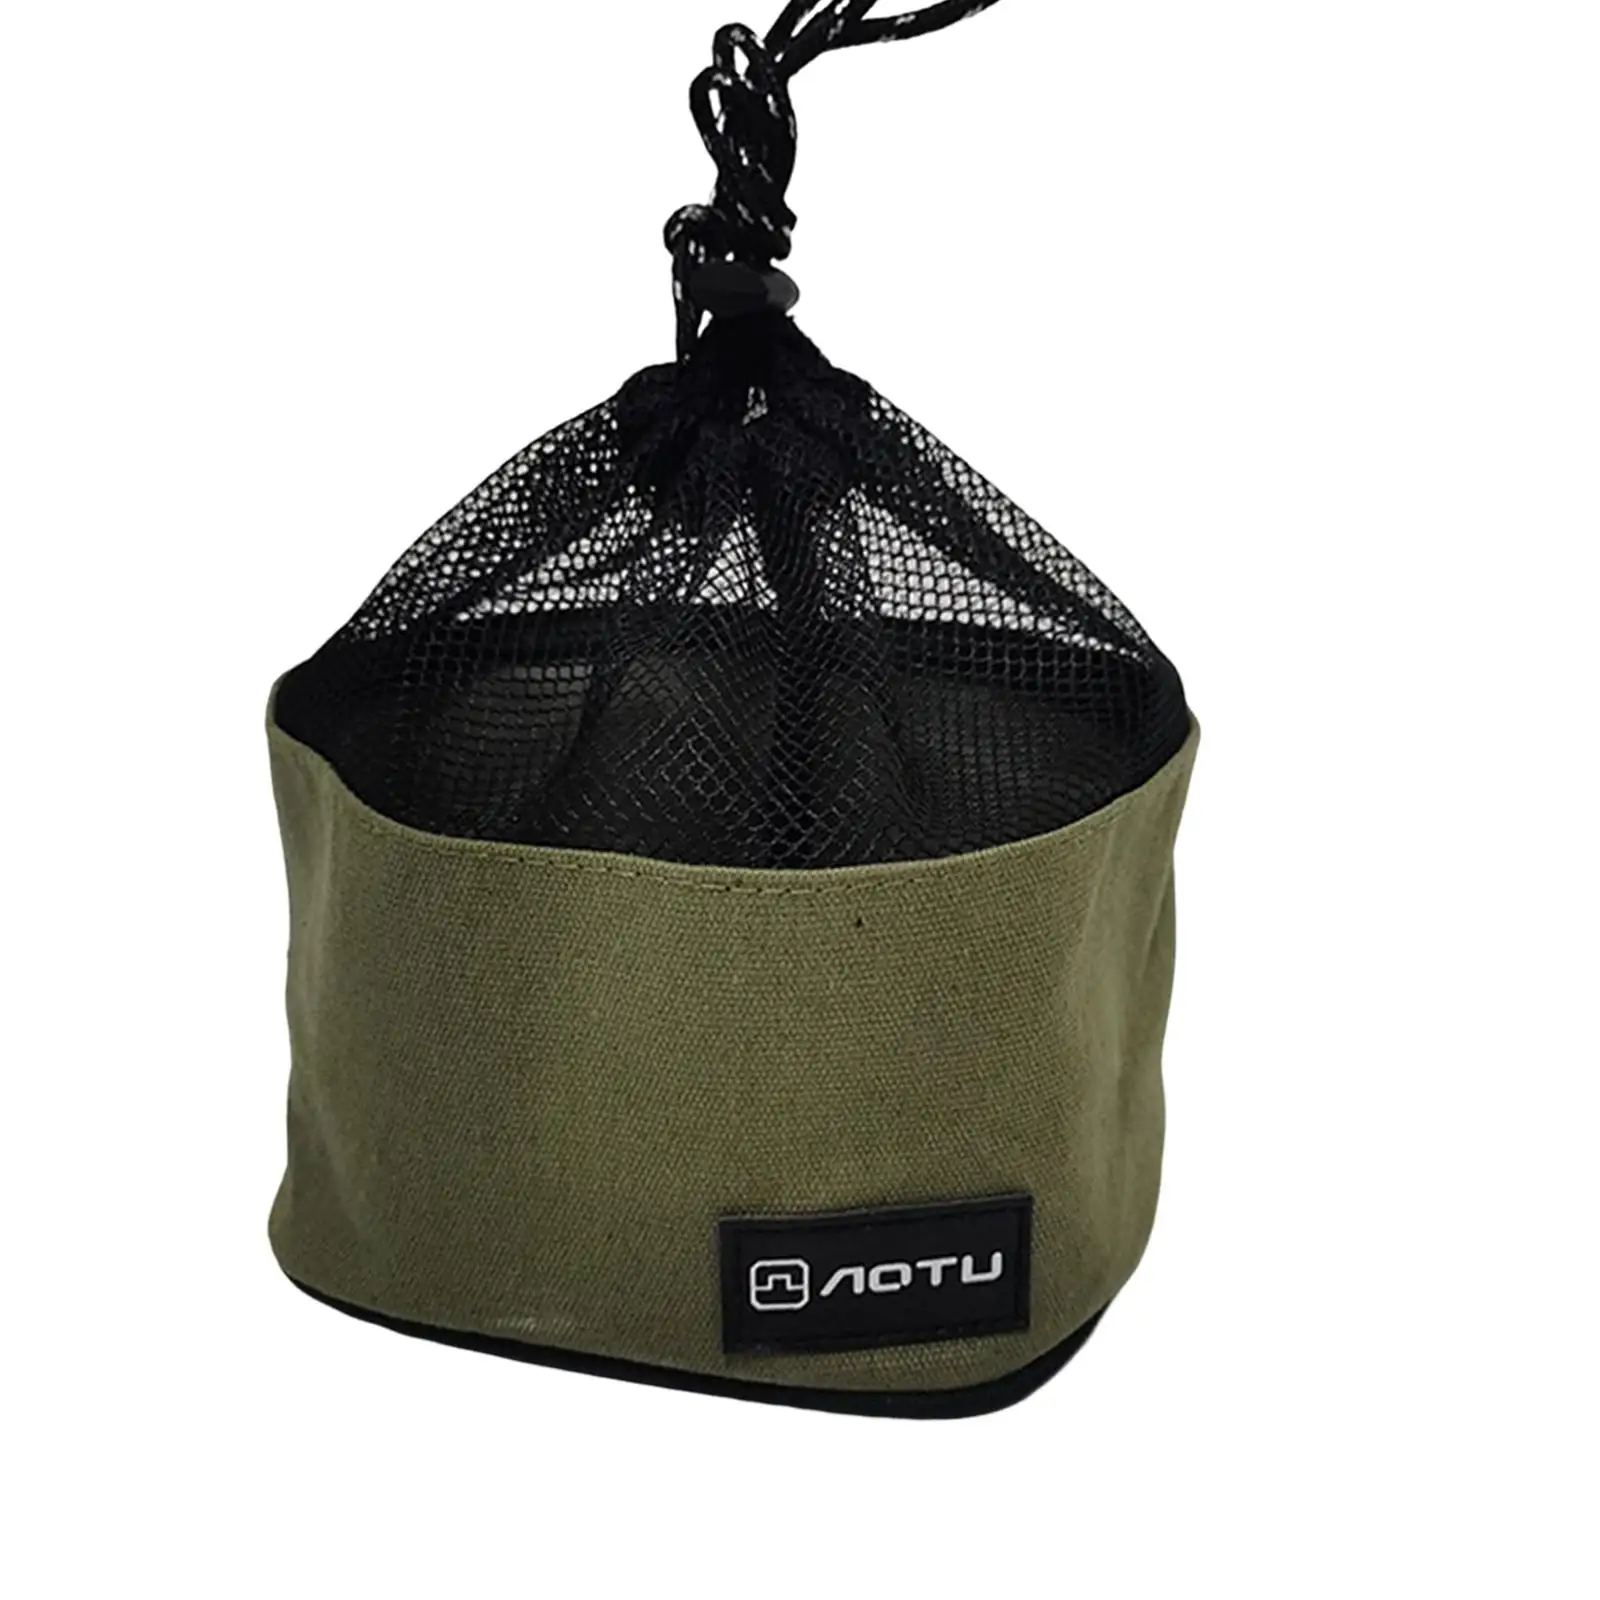 Portable Camping Cookware Storage Bag Case Drawstring Bag Pouch Tote Tableware